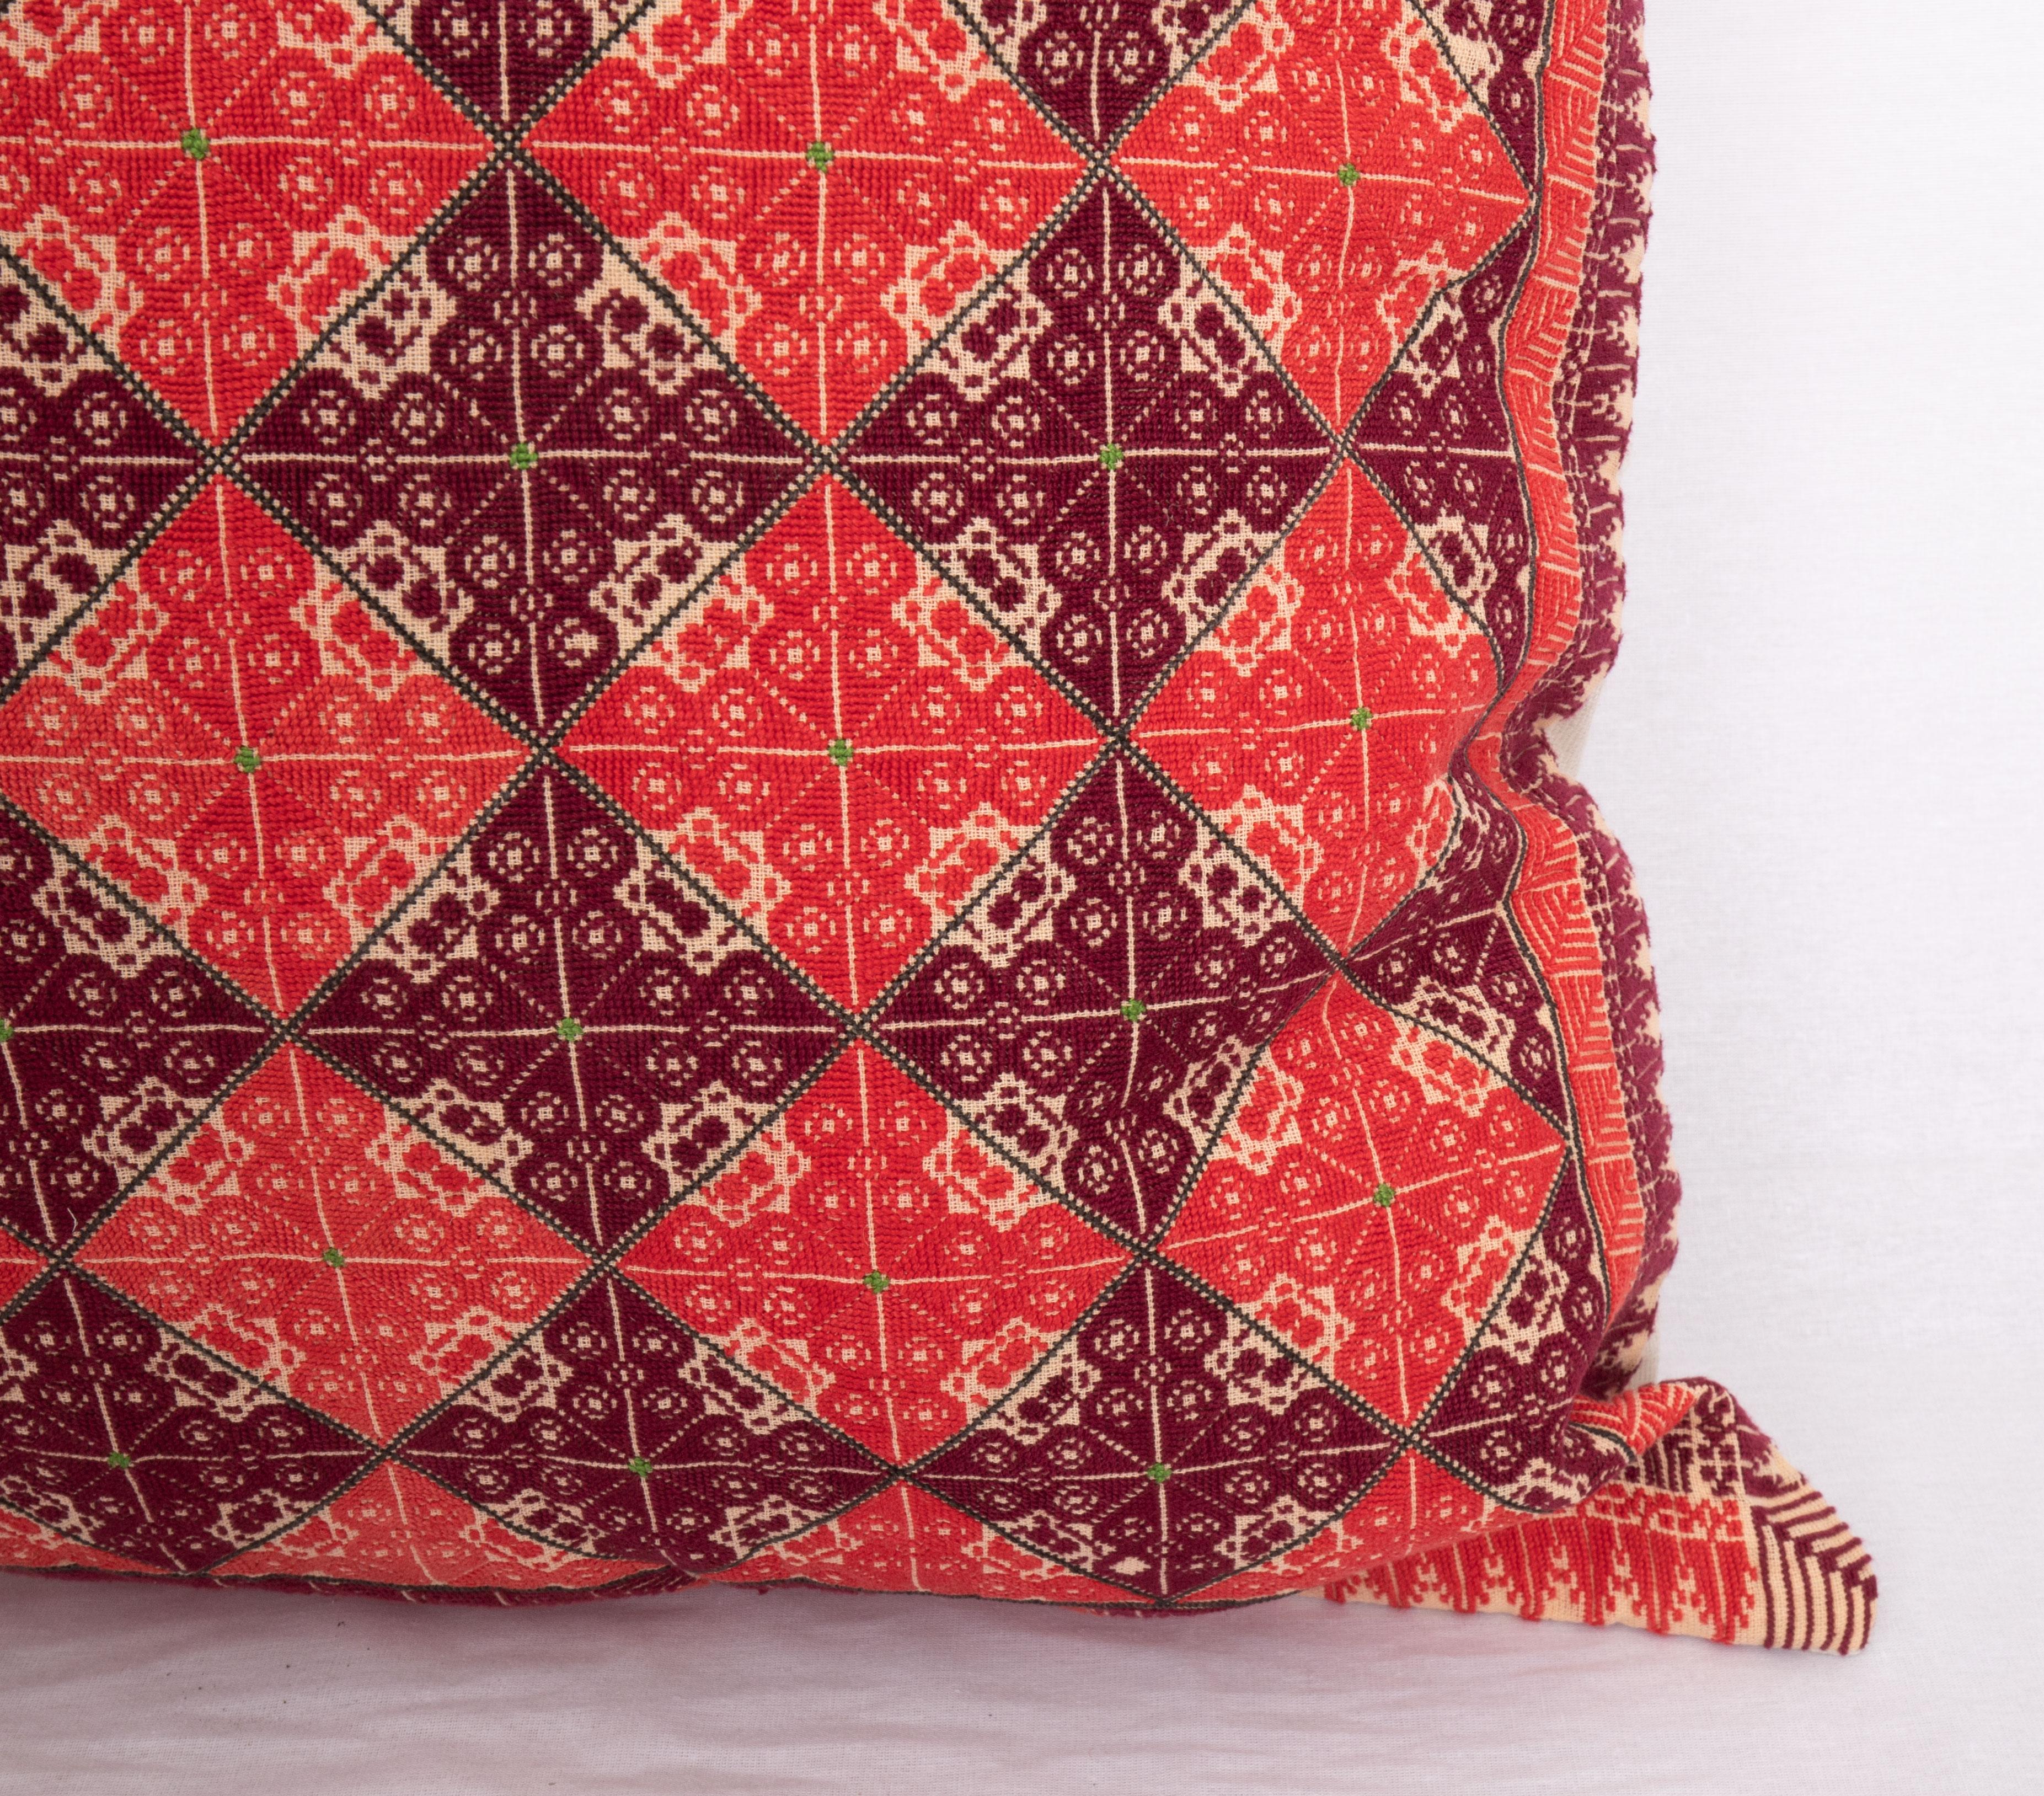 Embroidered Palestinian Pillow Cover, Mid 20th C